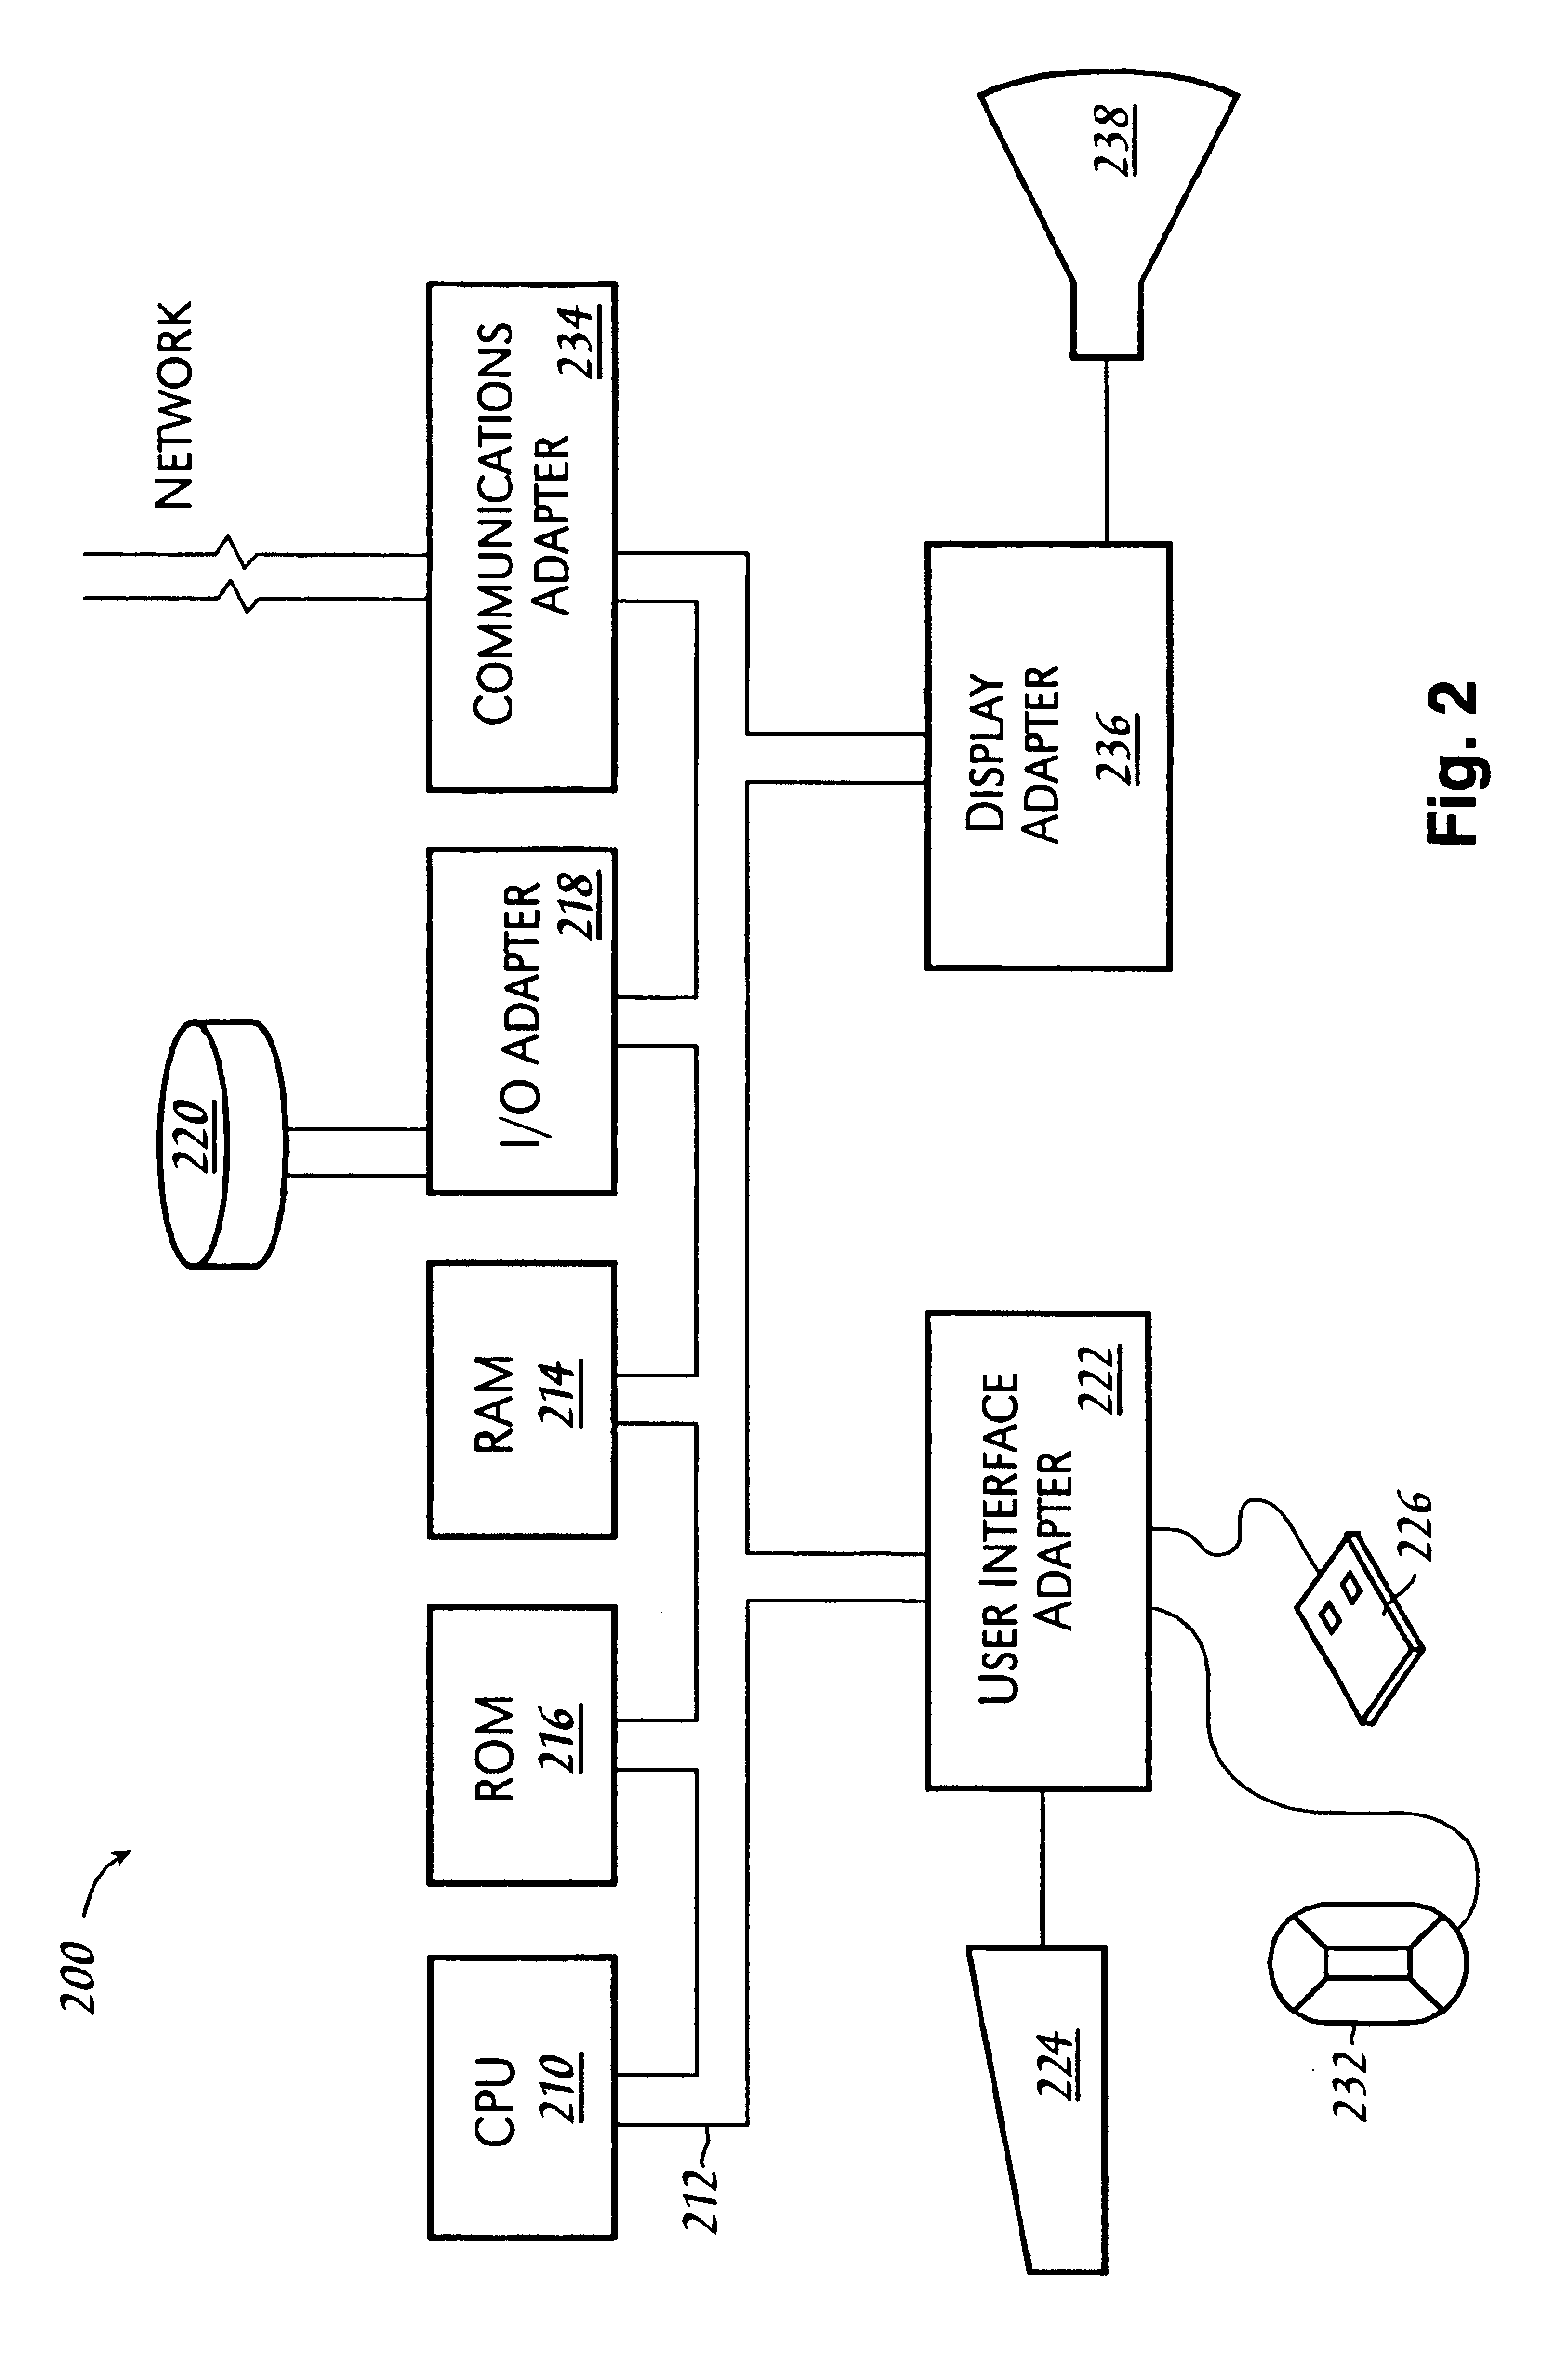 Composite keystore facility apparatus and method therefor